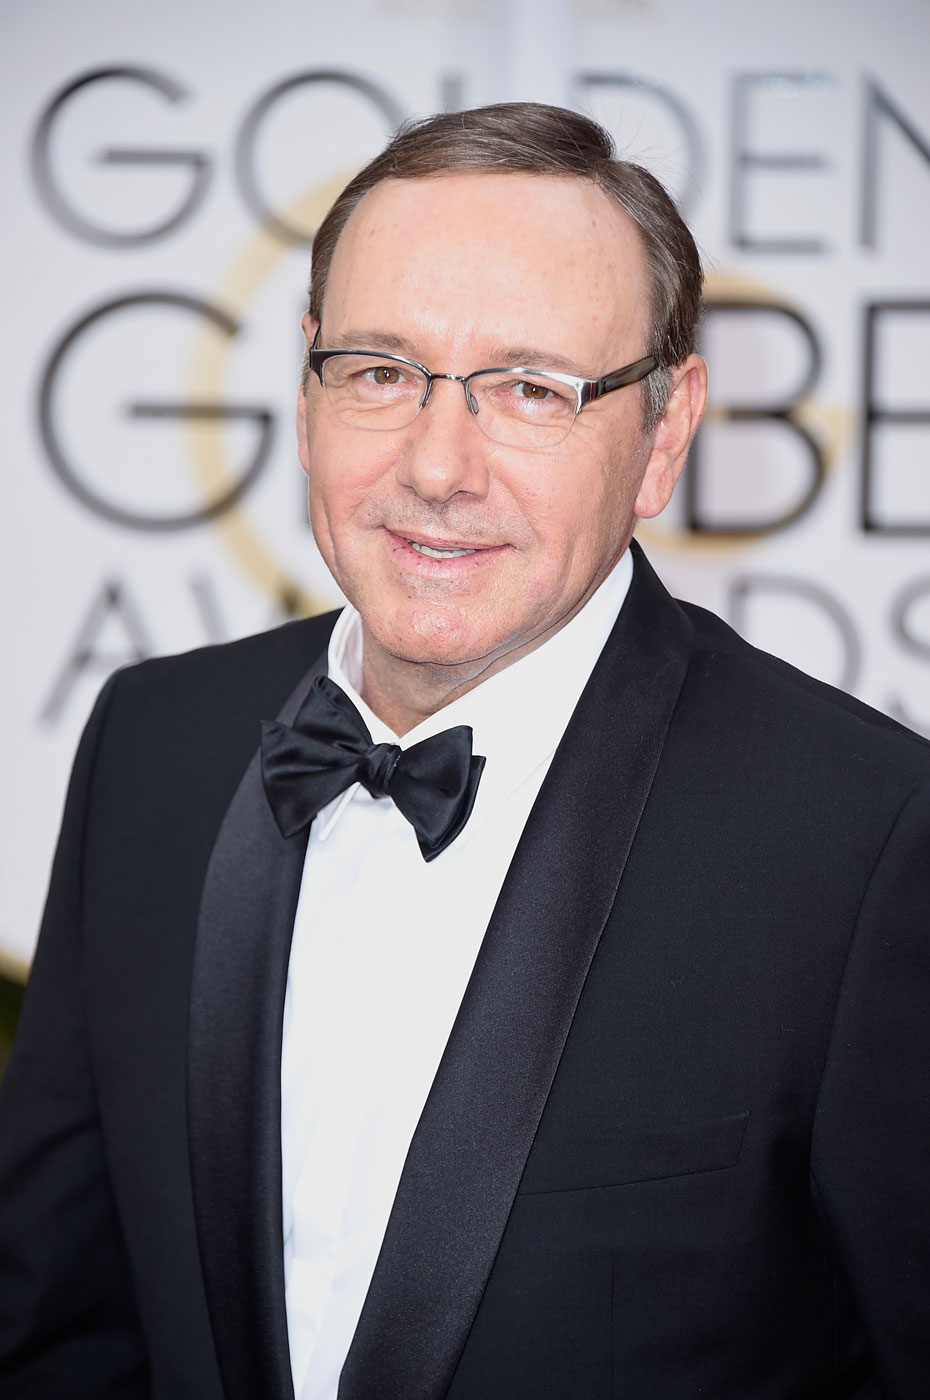 Kevin Spacey attends the 72nd Annual Golden Globe Awards at The Beverly Hilton Hotel on Jan. 11, 2015 in Beverly Hills, Calif.